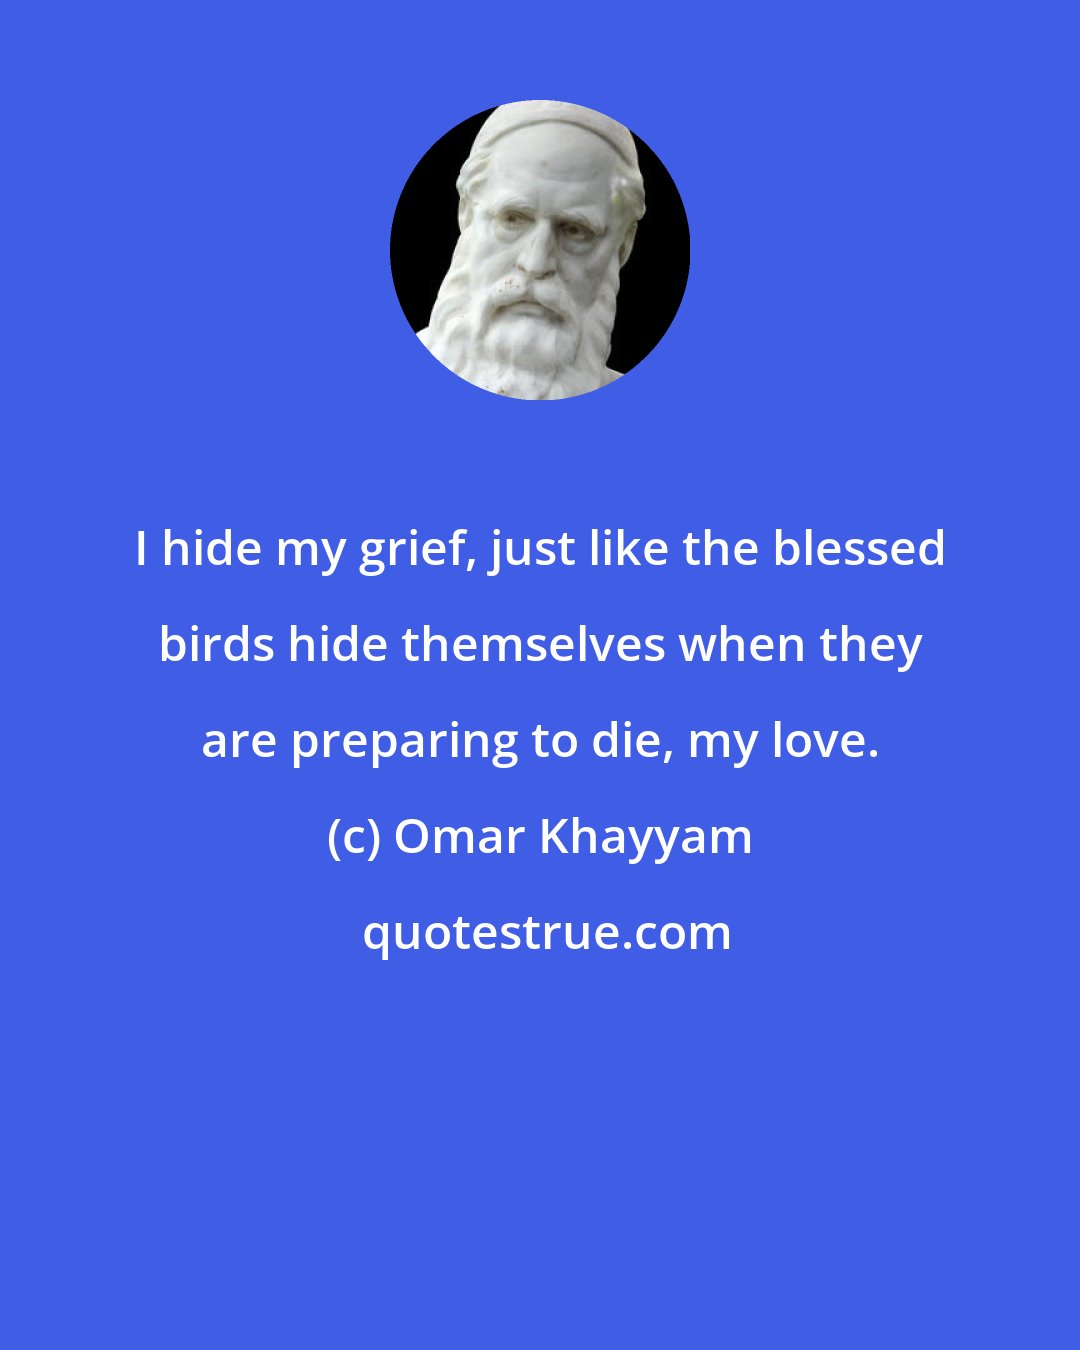 Omar Khayyam: I hide my grief, just like the blessed birds hide themselves when they are preparing to die, my love.